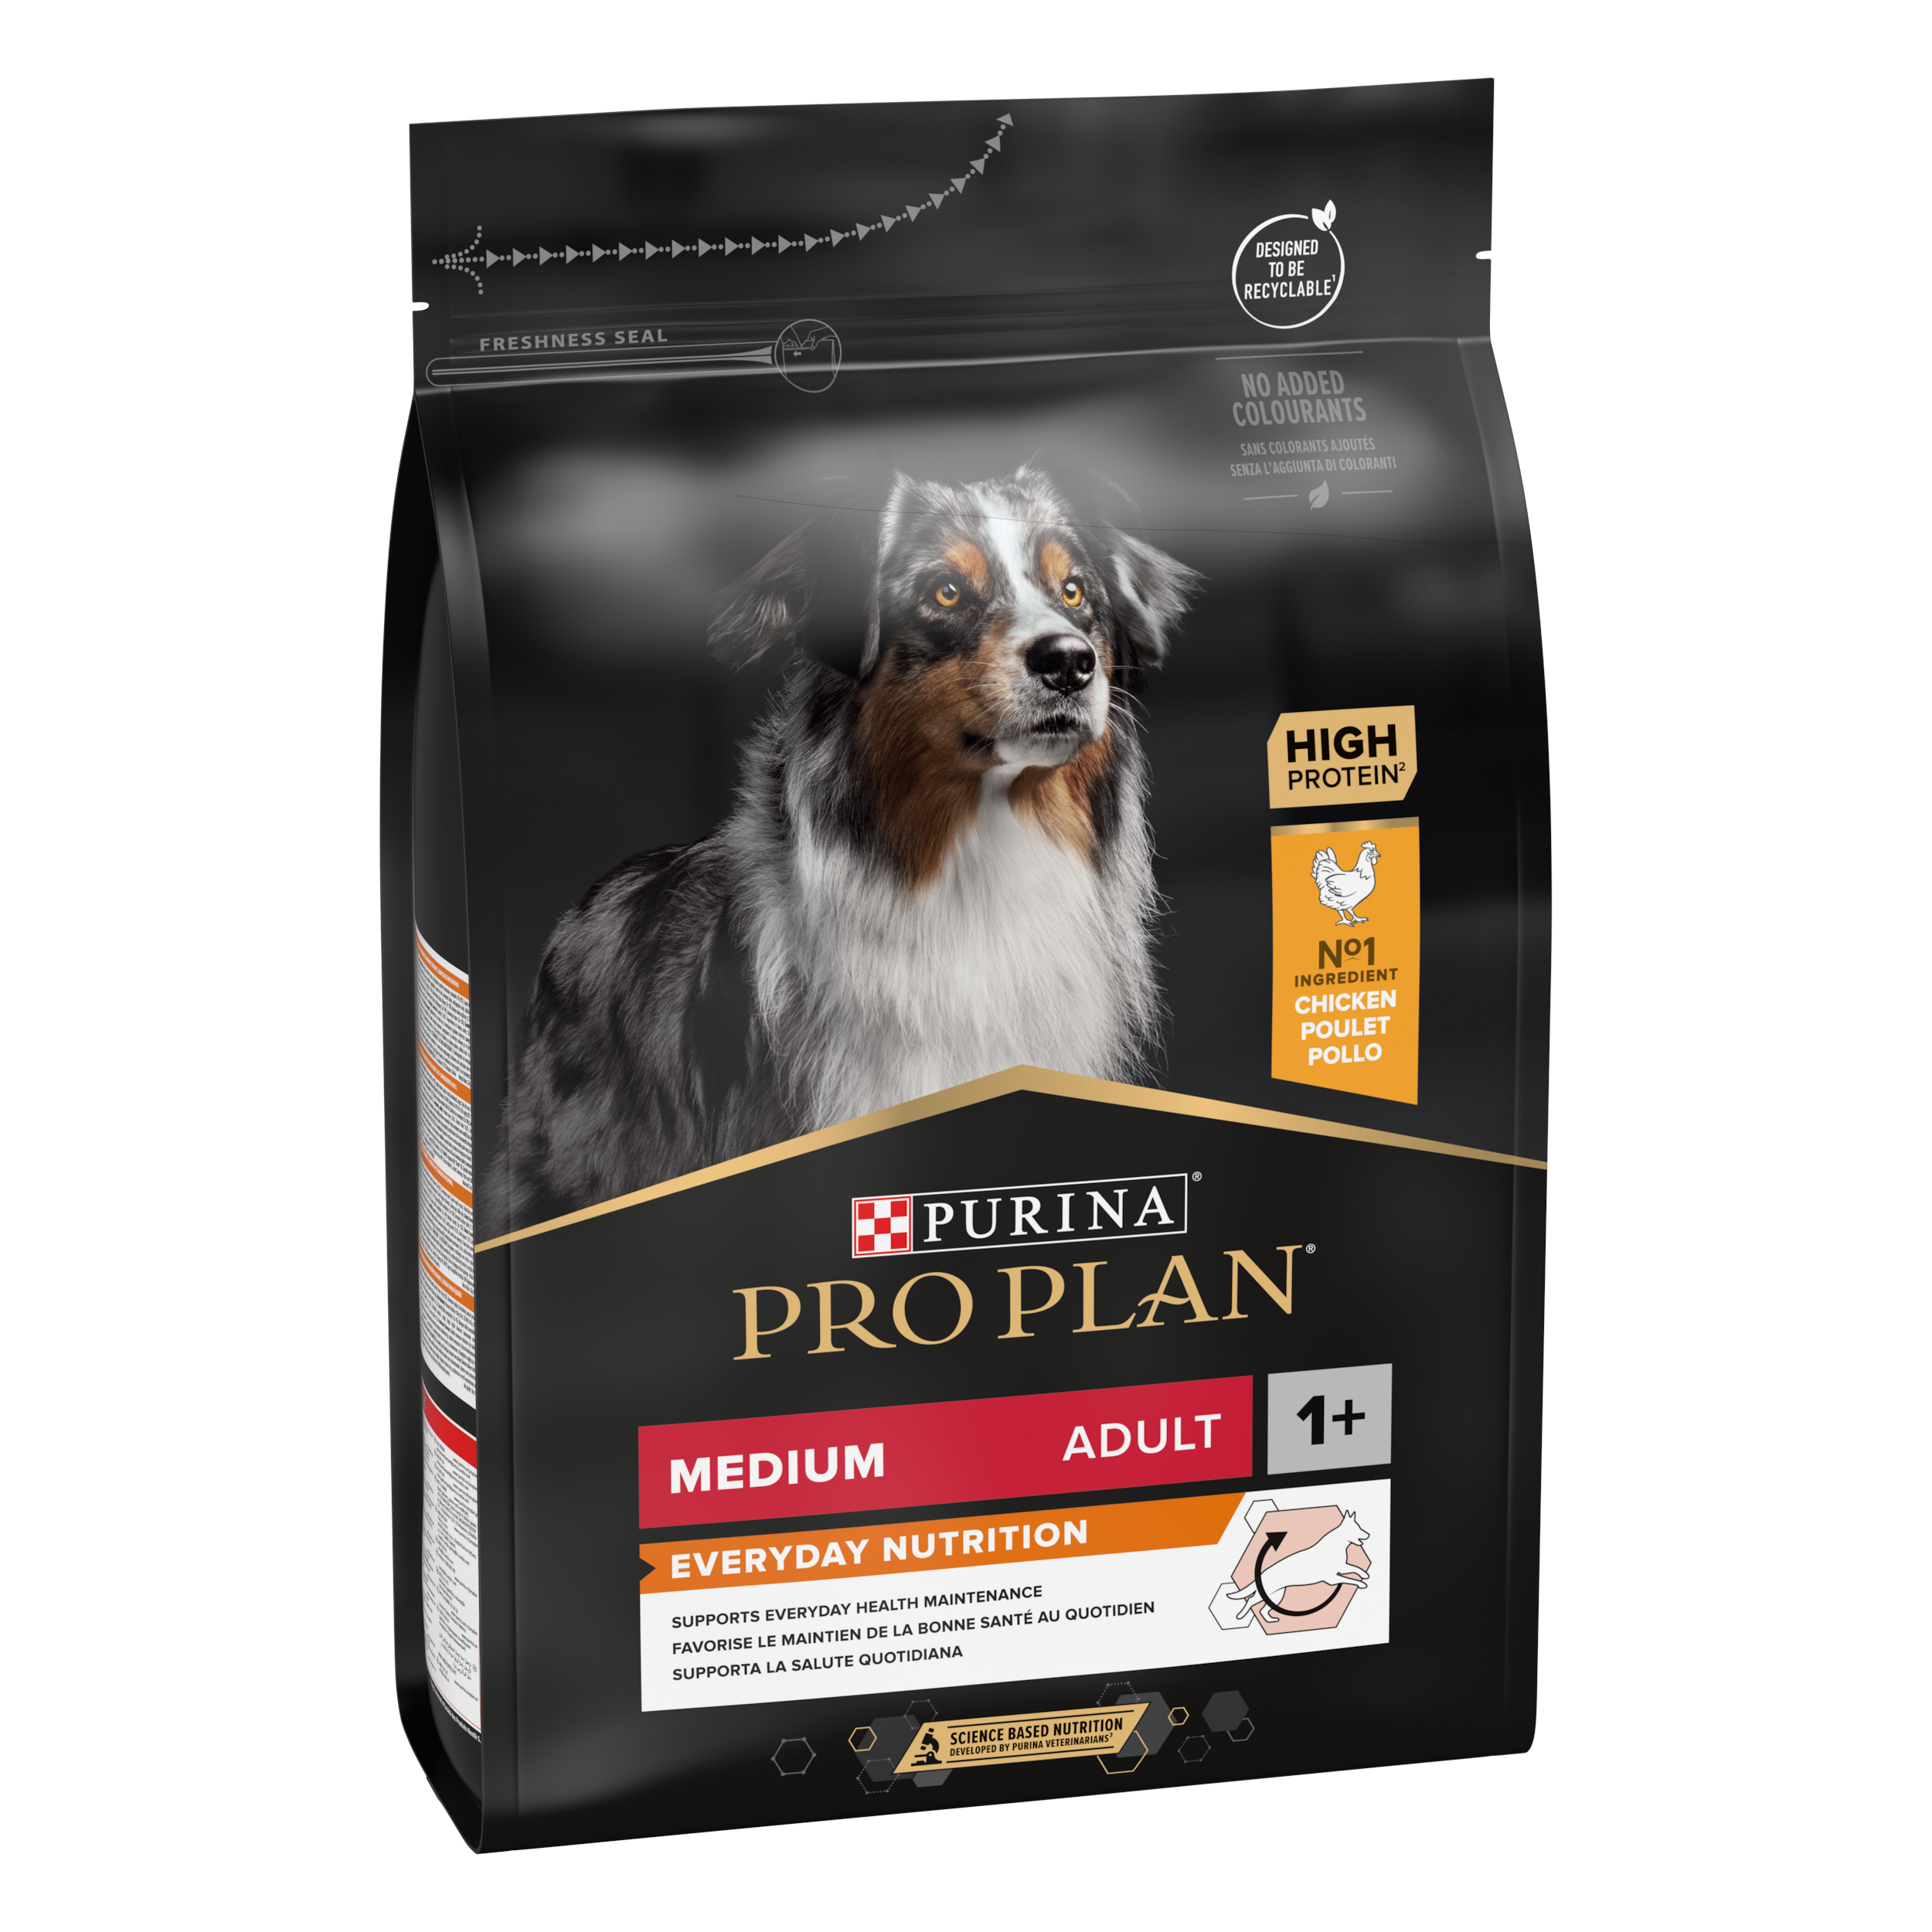 PURINA PRO PLAN ADULT Everyday Nutrition, Talie Medie, Pui, 3 kg Adult